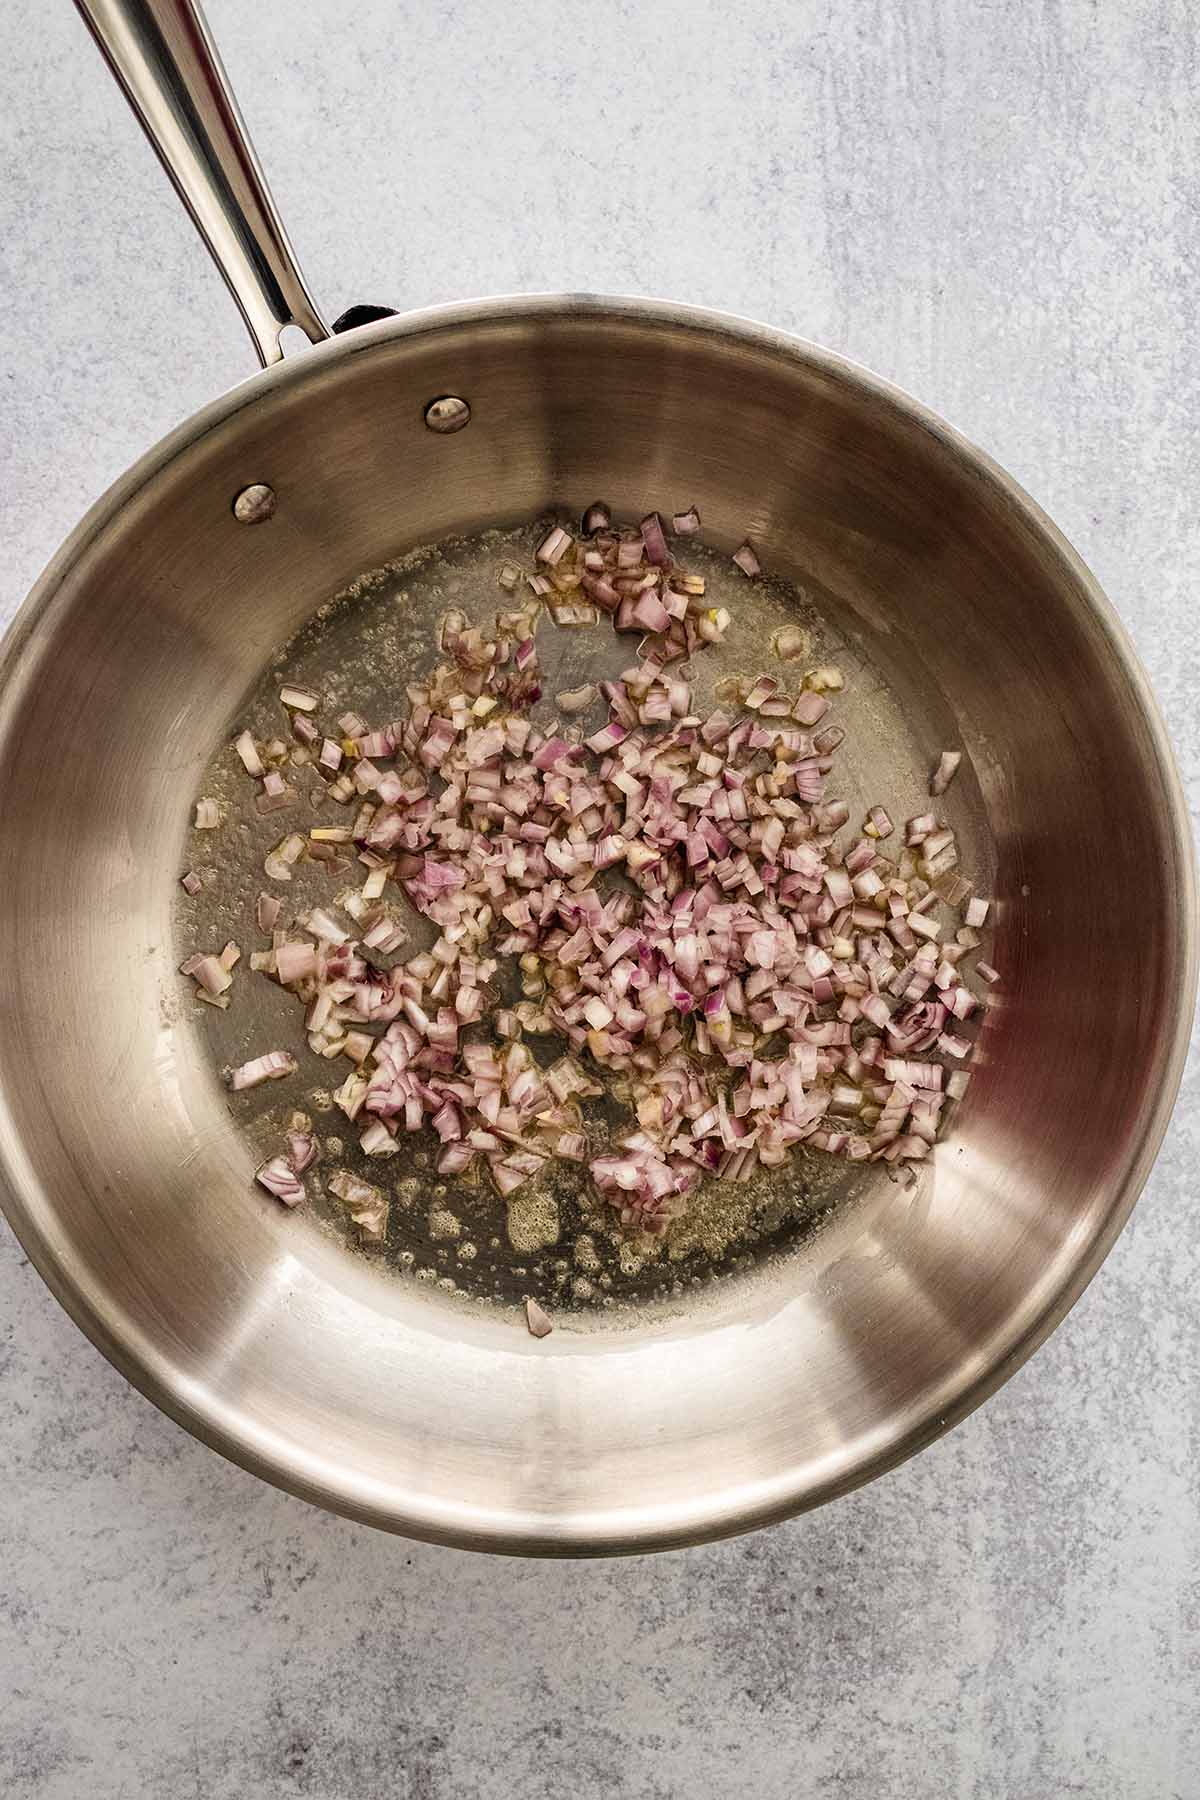 Diced shallot cooking in a stainless steel skillet